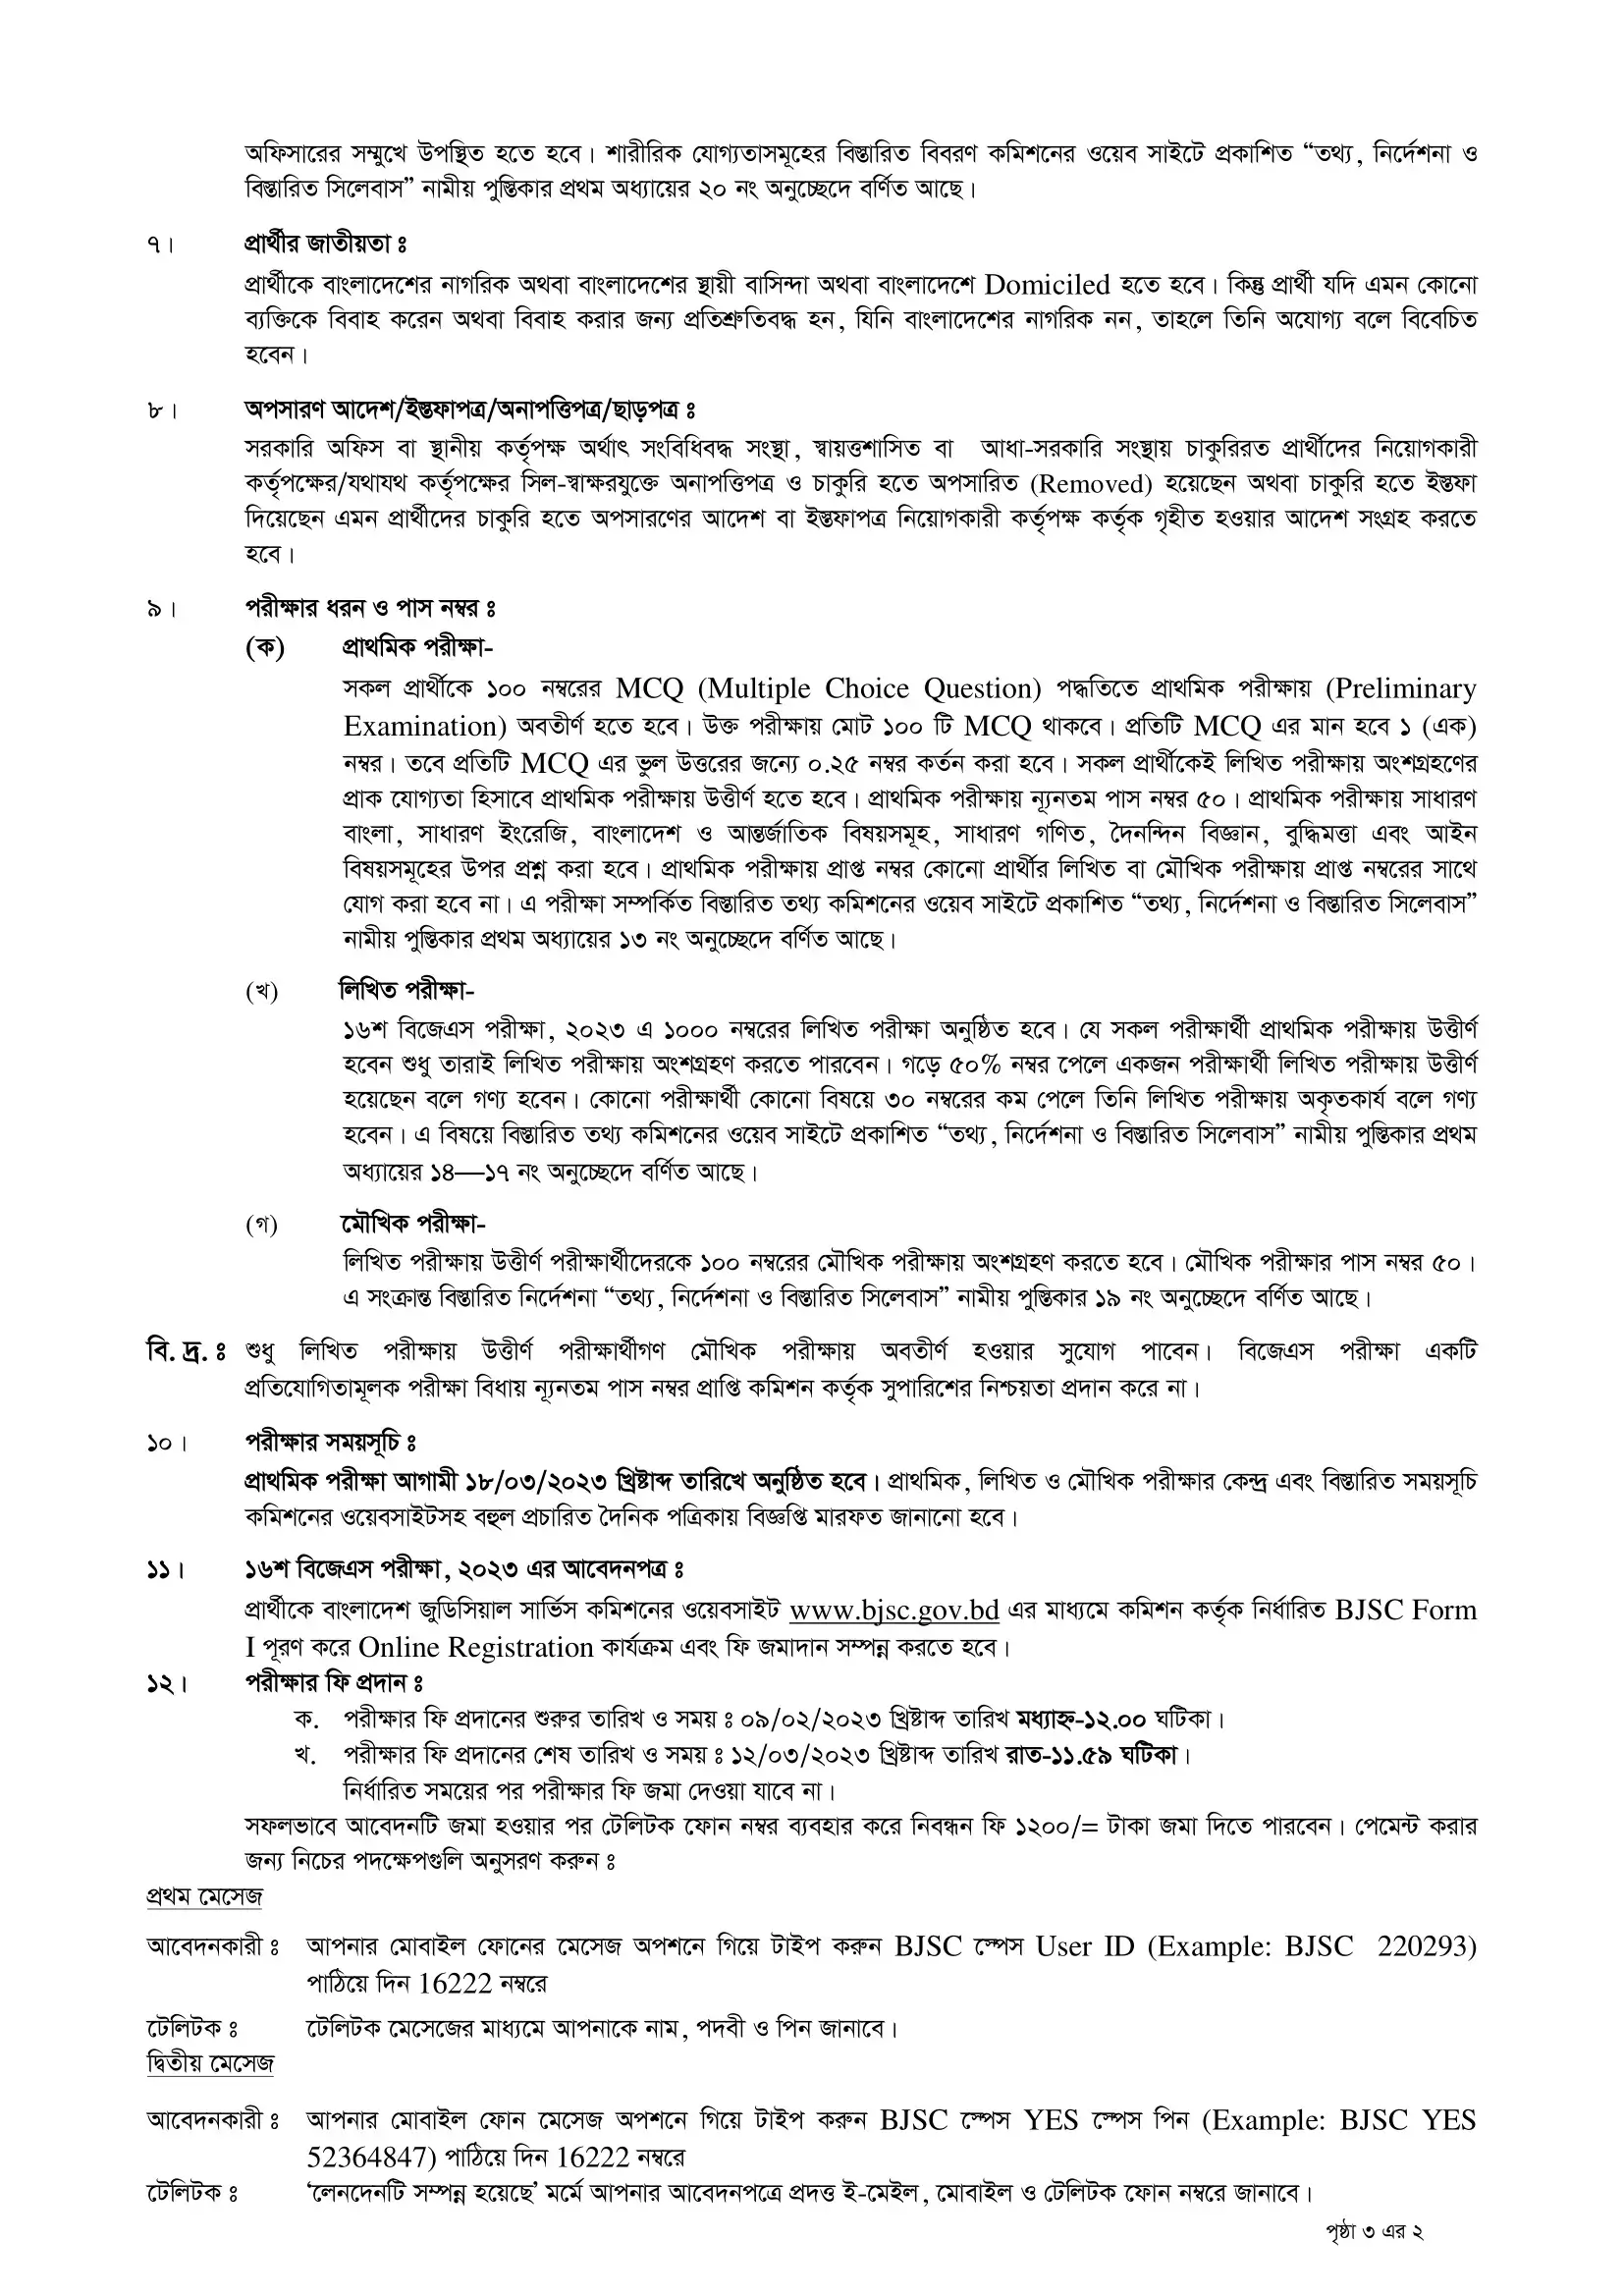 First page of Bangladesh Judicial Service Commission (BJSC) recruitment circular published on 07 February 2023